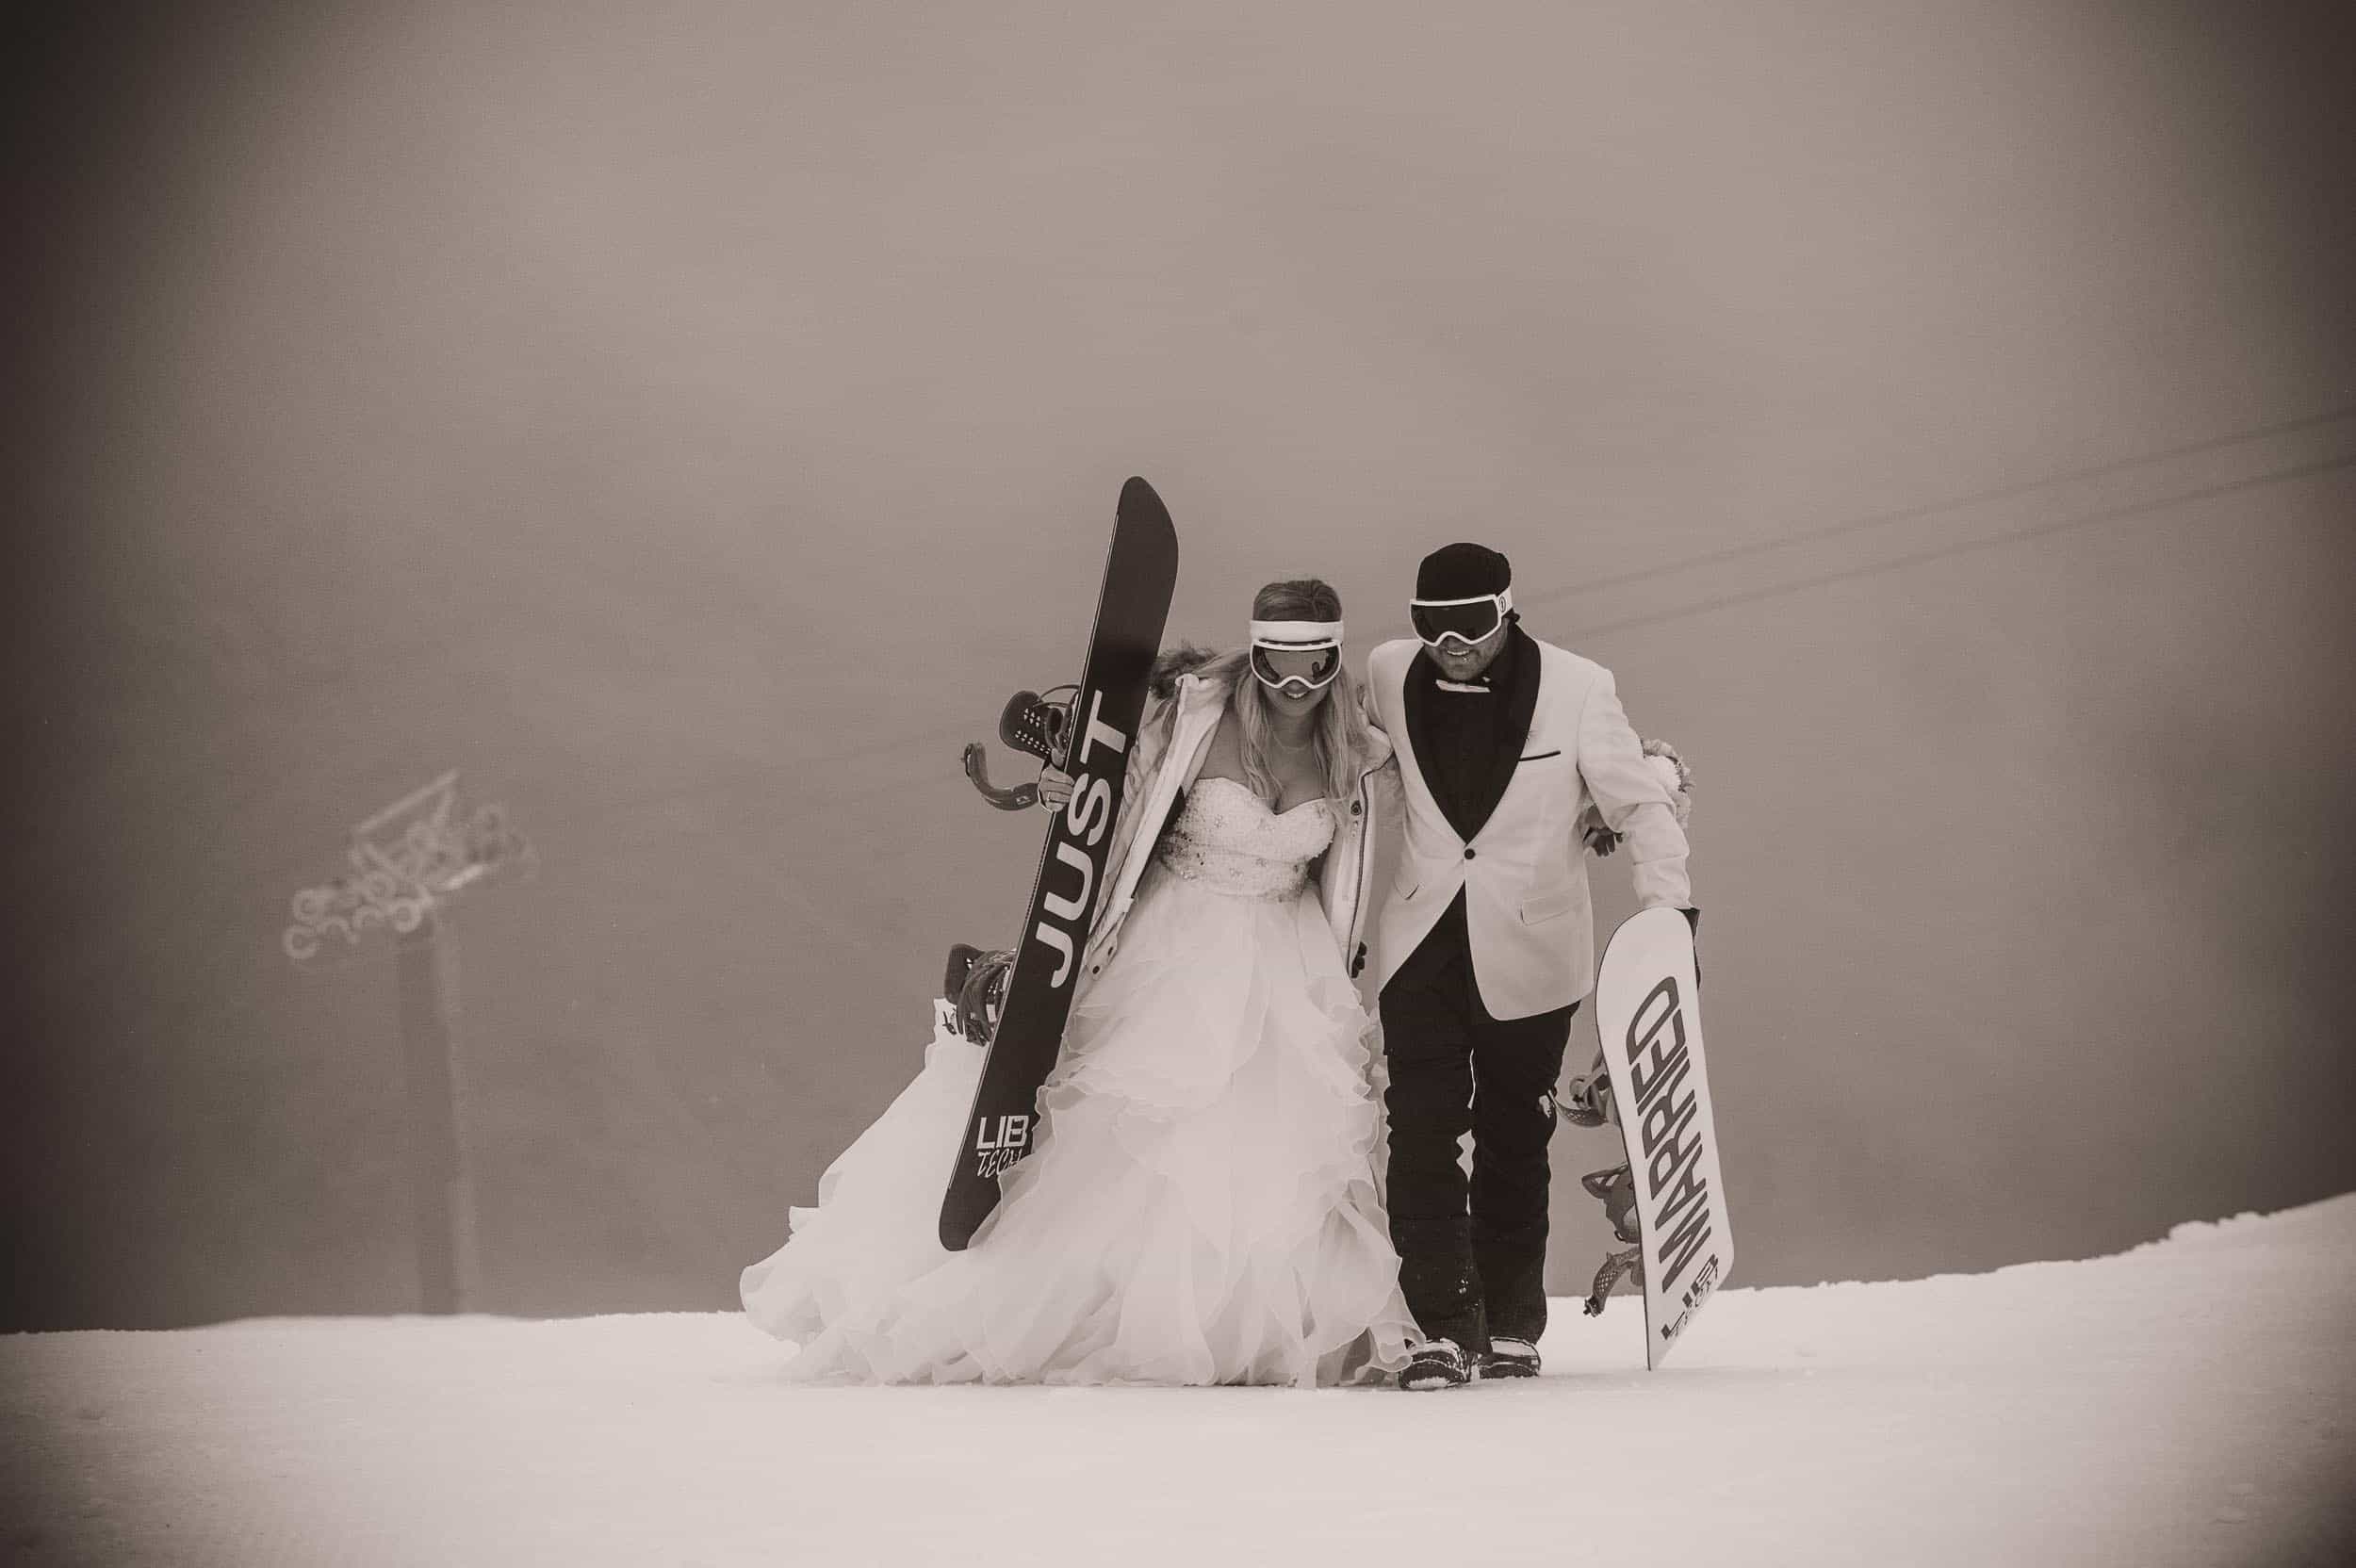 queenstown winter wedding queenstown wedding trends Now this is what I call a Queenstown Winter Wedding!! At Coronet Peak...on snowboards...in a snow storm!! fallon photography